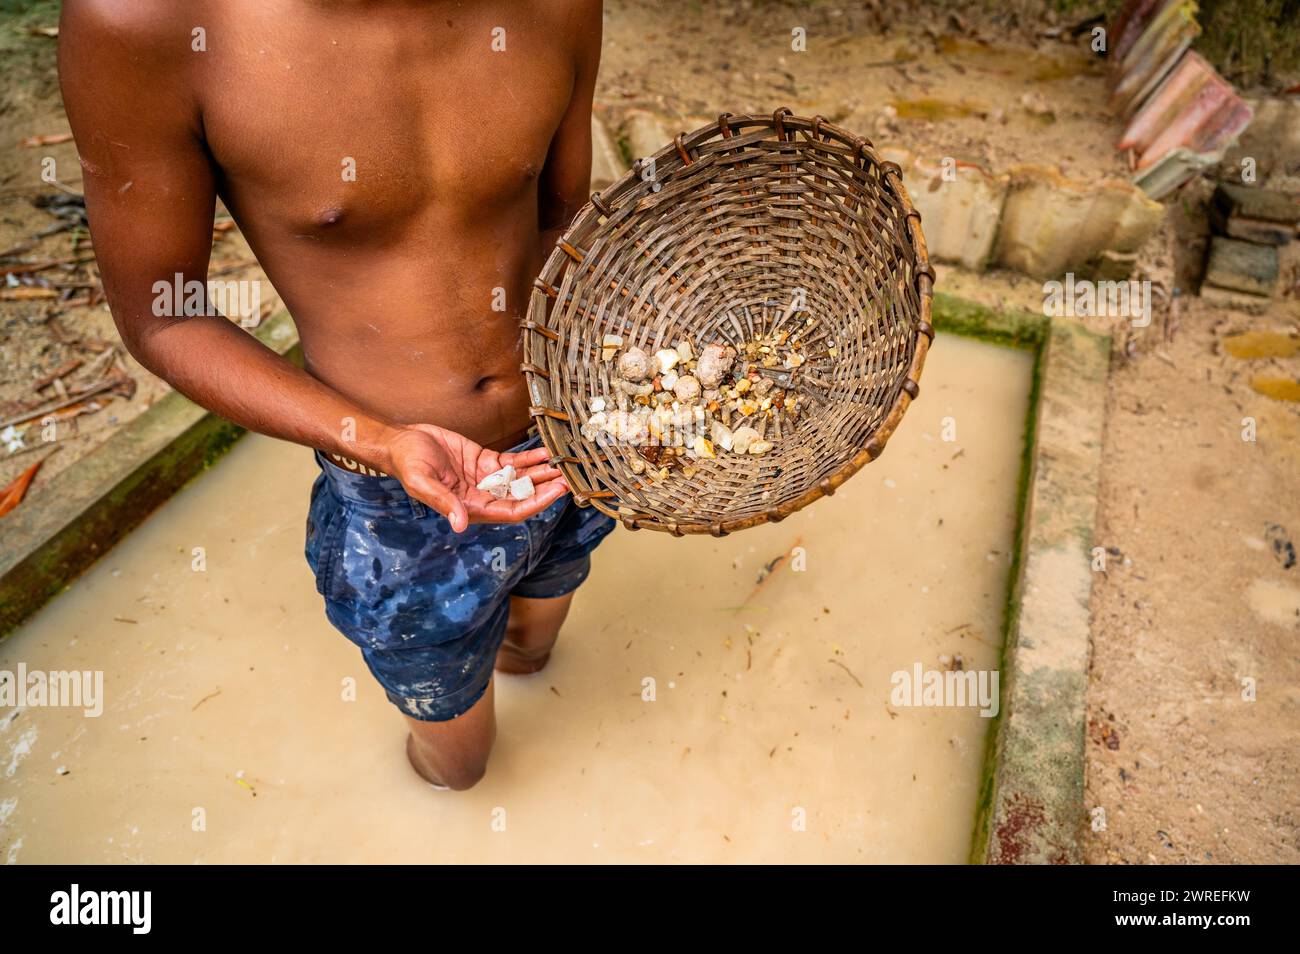 Boy in muddy water hold washed mined gemstone and rattan pan. Sri Lanka. Stock Photo